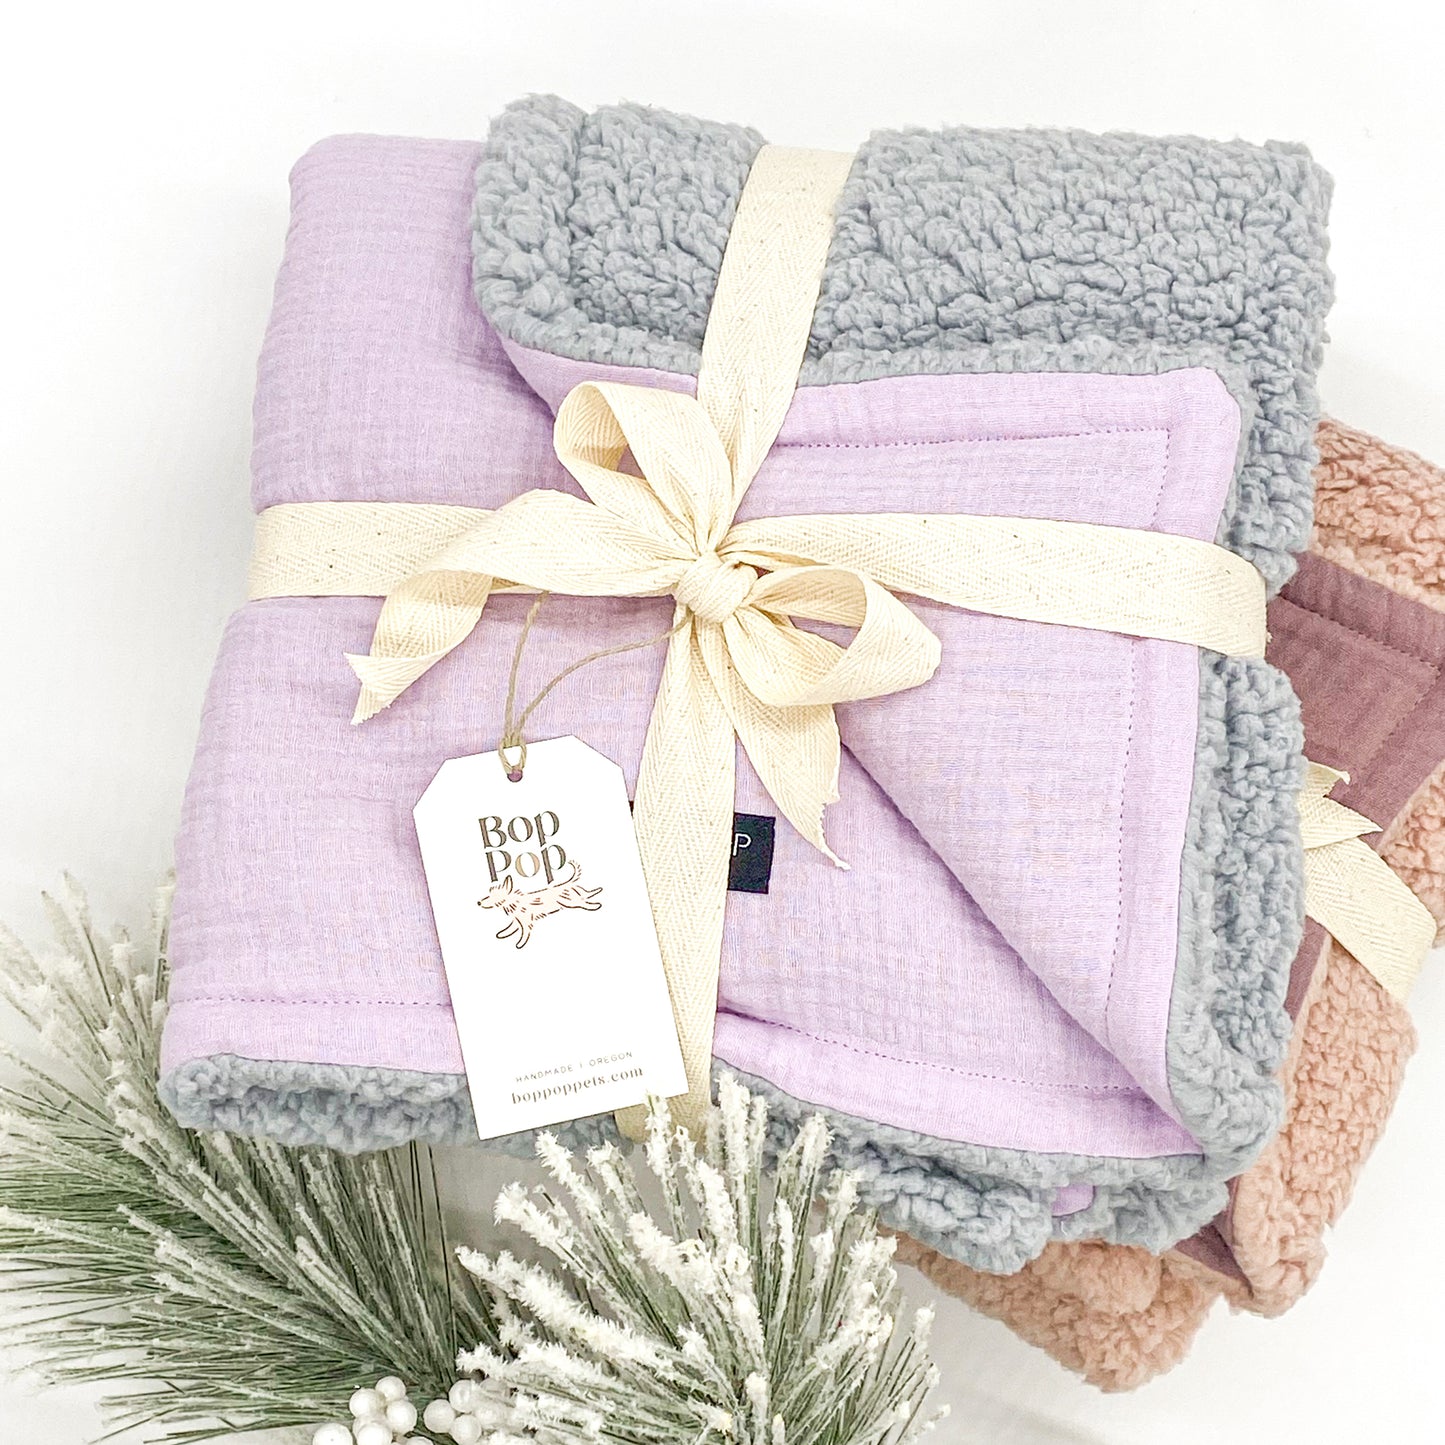 Mini Pet Blanket | Small & Odd Sizes (Remnant|Sustainable)